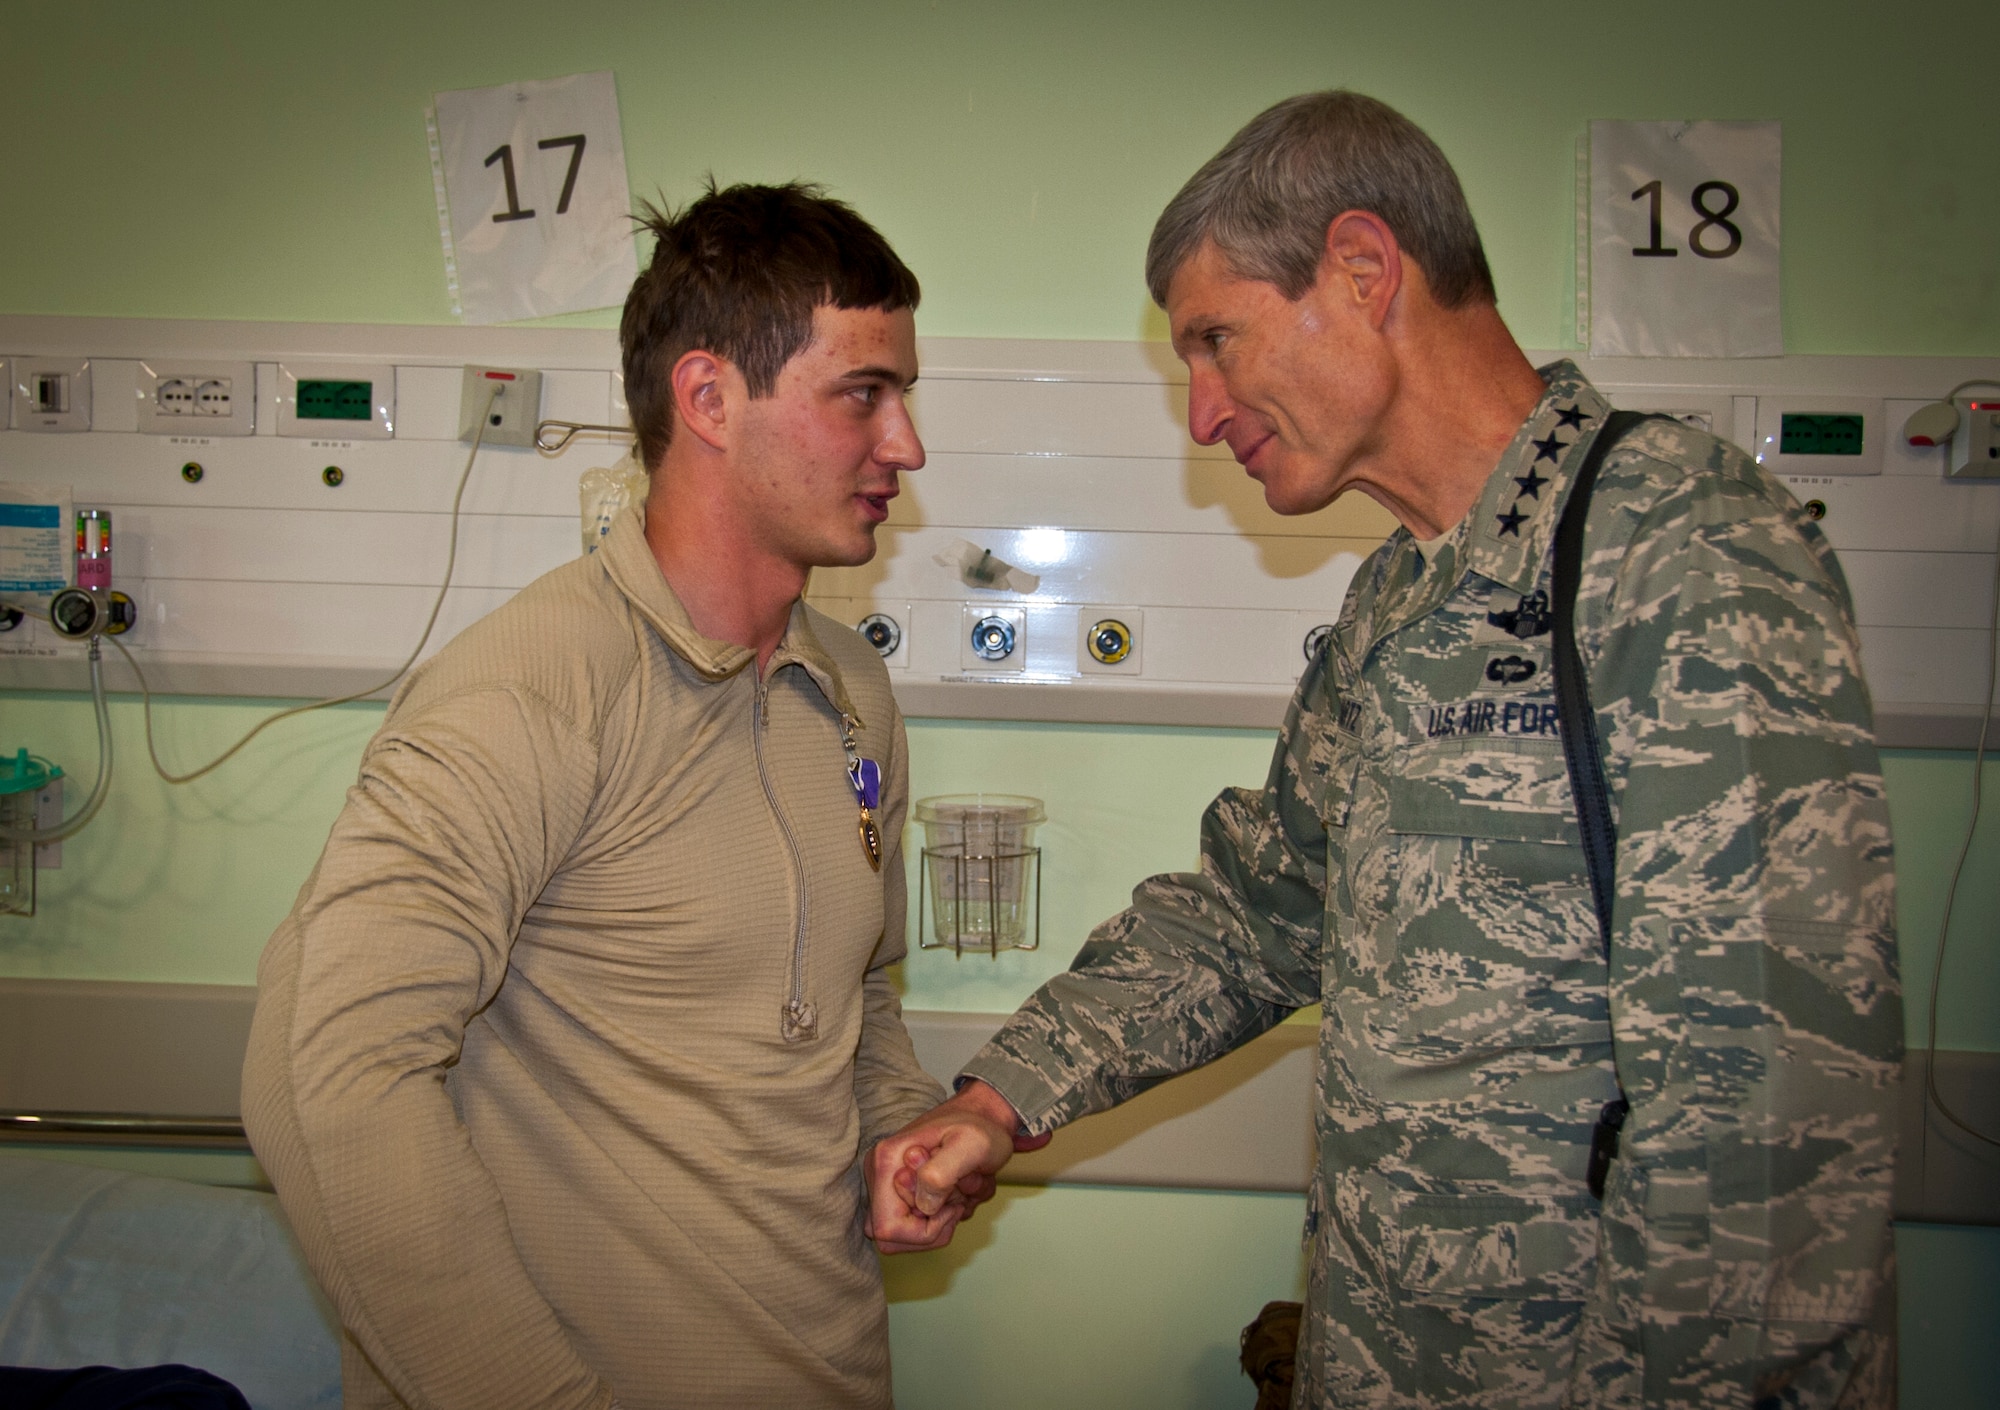 KANDAHAR AIRFIELD, Afghanistan -- Air Force Chief of Staff Gen. Norton Schwartz speaks with Senior Airman Taras Ivaniuk at Kandahar Airfield, Nov. 16, 2011. Ivaniuk received a Purple Heart and a Combat Action Medal for his actions during a recent personnel recovery mission. (U.S. Air Force photo/Senior Airman David Carbajal)